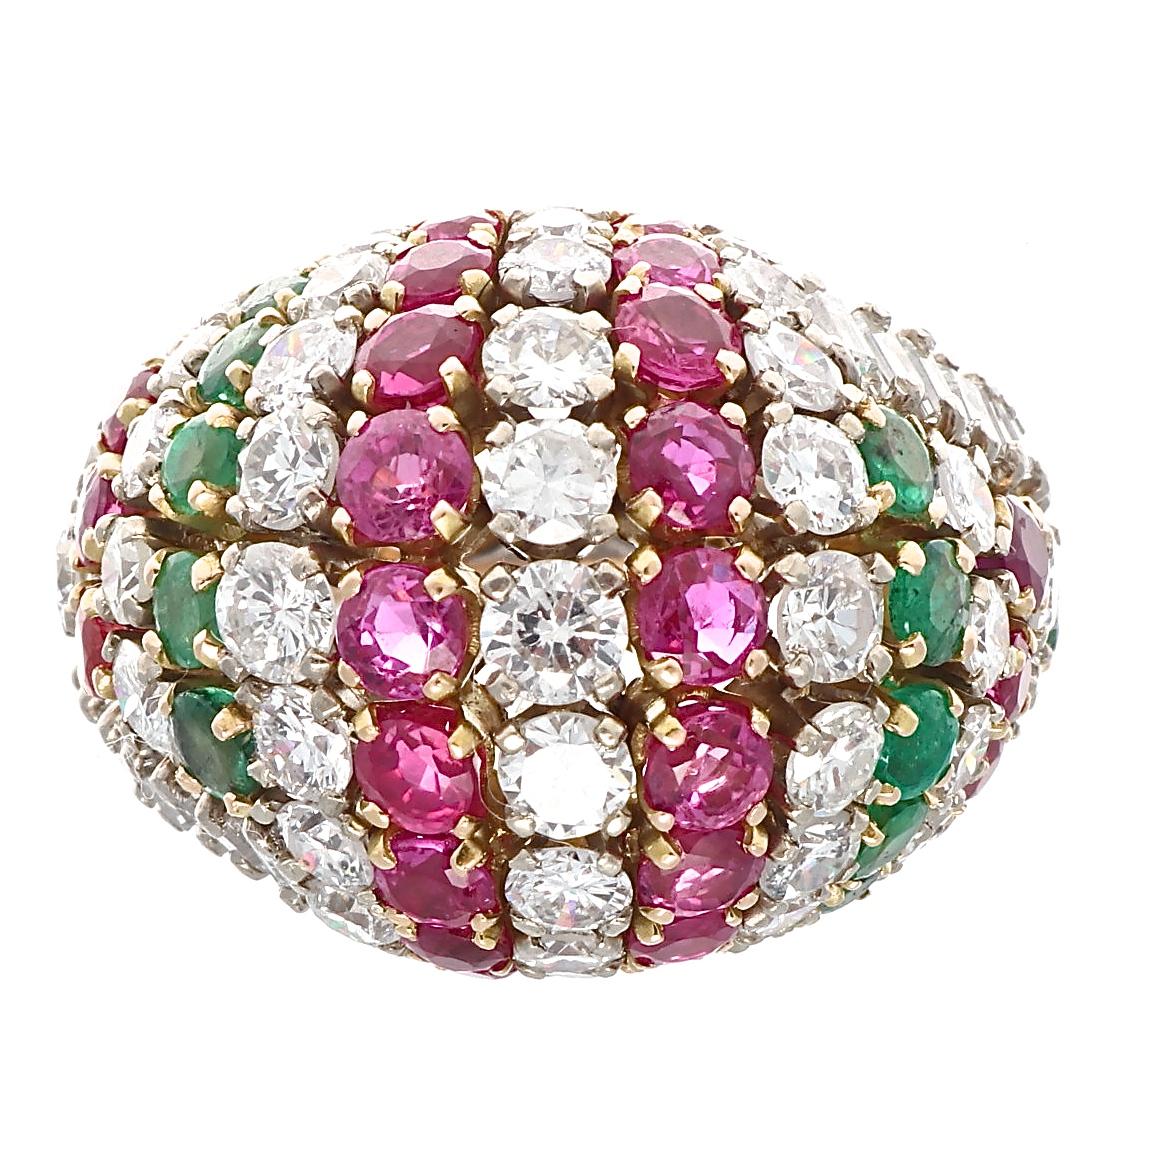 A dazzling display of color that lights up any room. Designed in alternating rows of diamonds, rubies and emeralds. Crafted in 18k yellow gold. Ring size 5 3/4 and may be re-sized to fit. 
7 day return policy for full cash refund
30 day return for